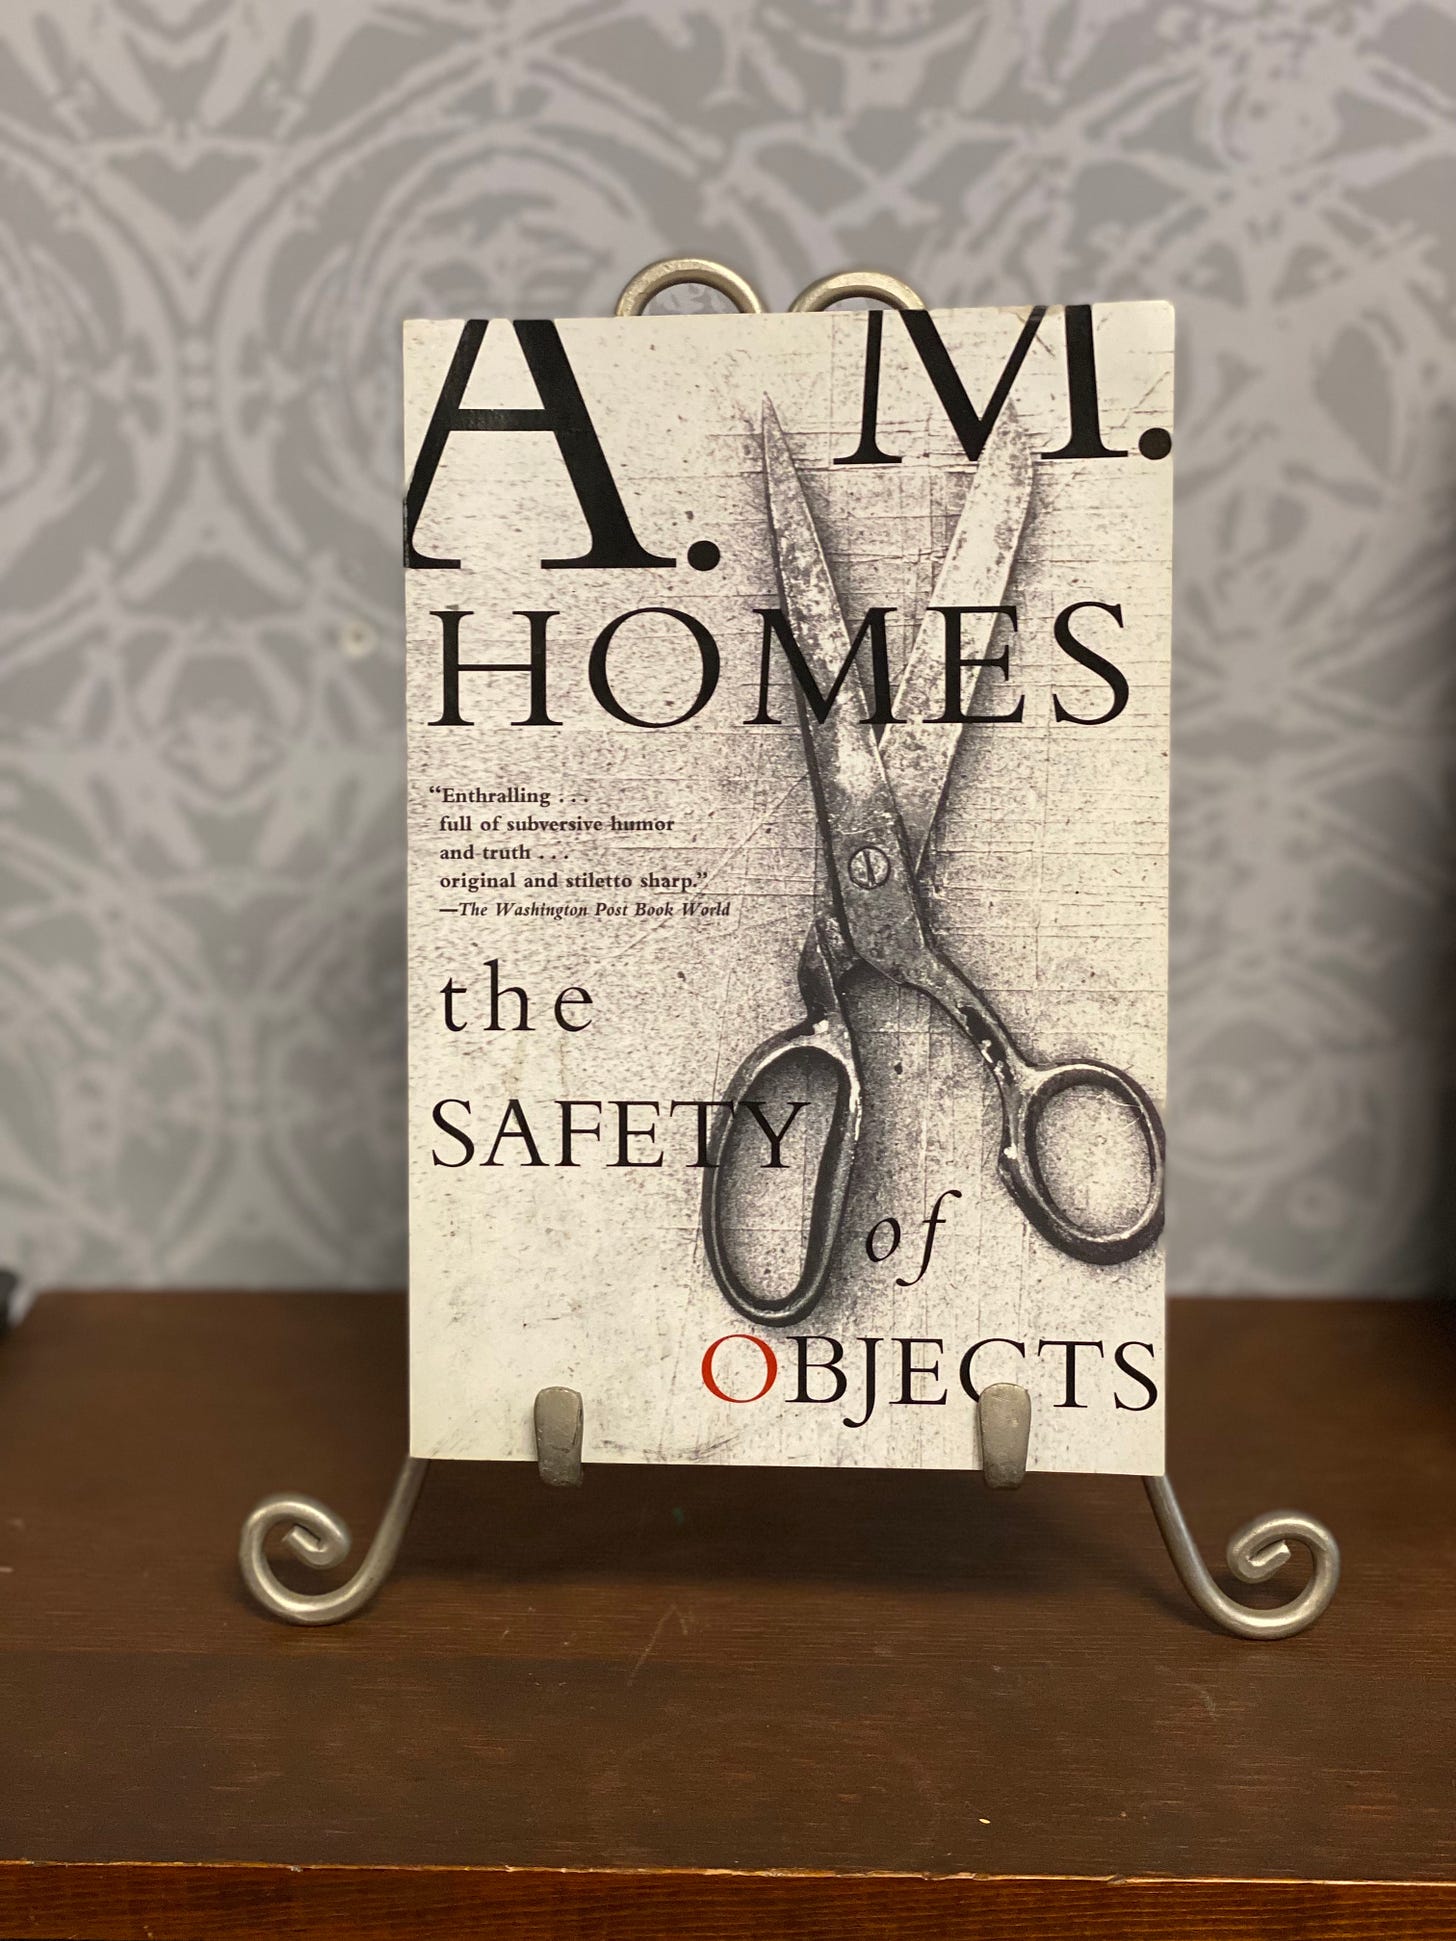 Black and white cover of The Safety of Objects, featuring an open pair of scissors and a gritty looking texture